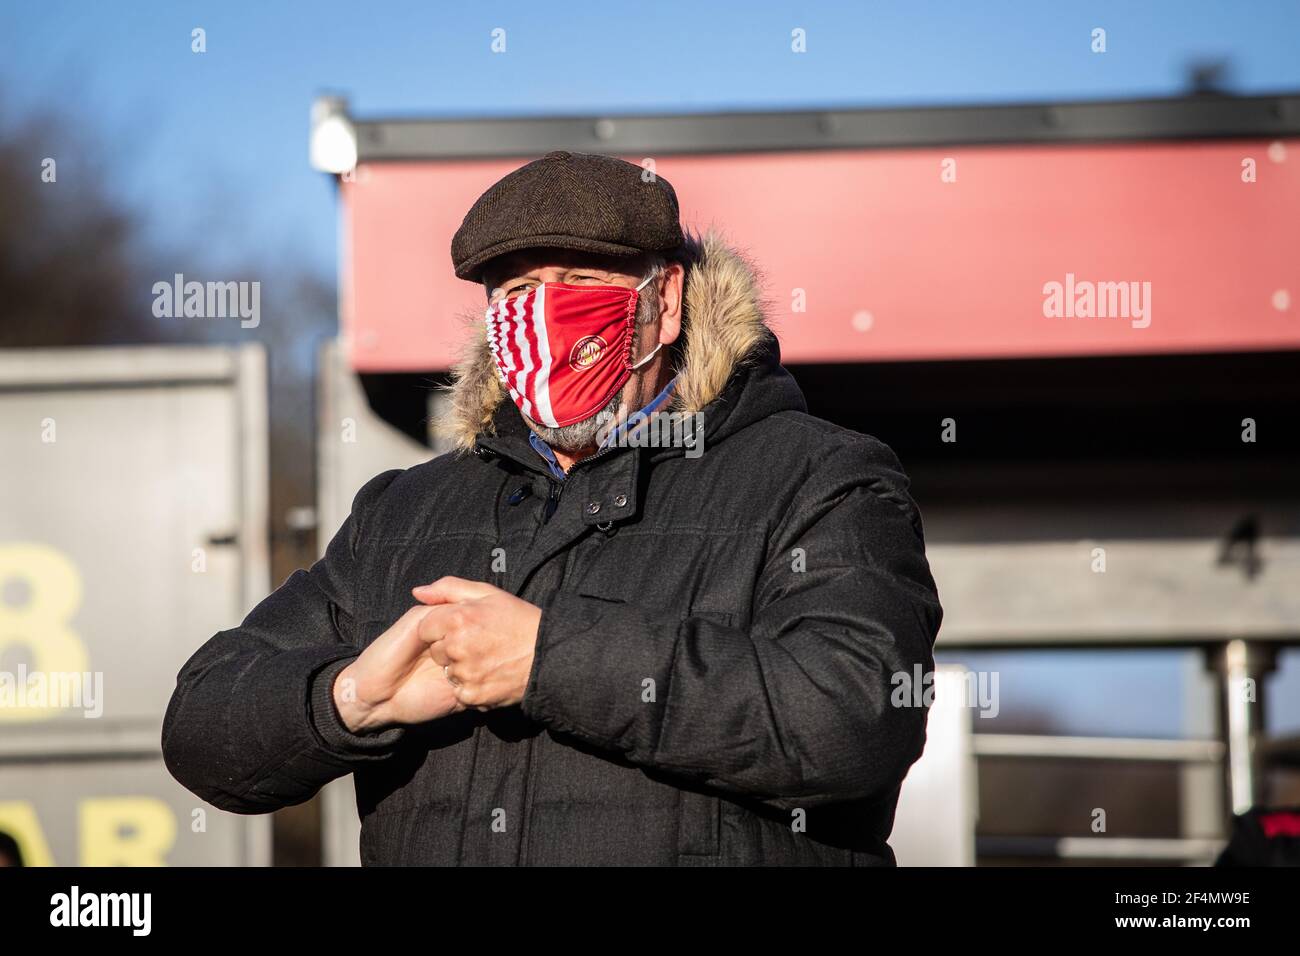 Male football supporter enters stadium and sanitises hands whilst wearing face covering during coronavirus, Covid-19 pandemic in England, UK Stock Photo